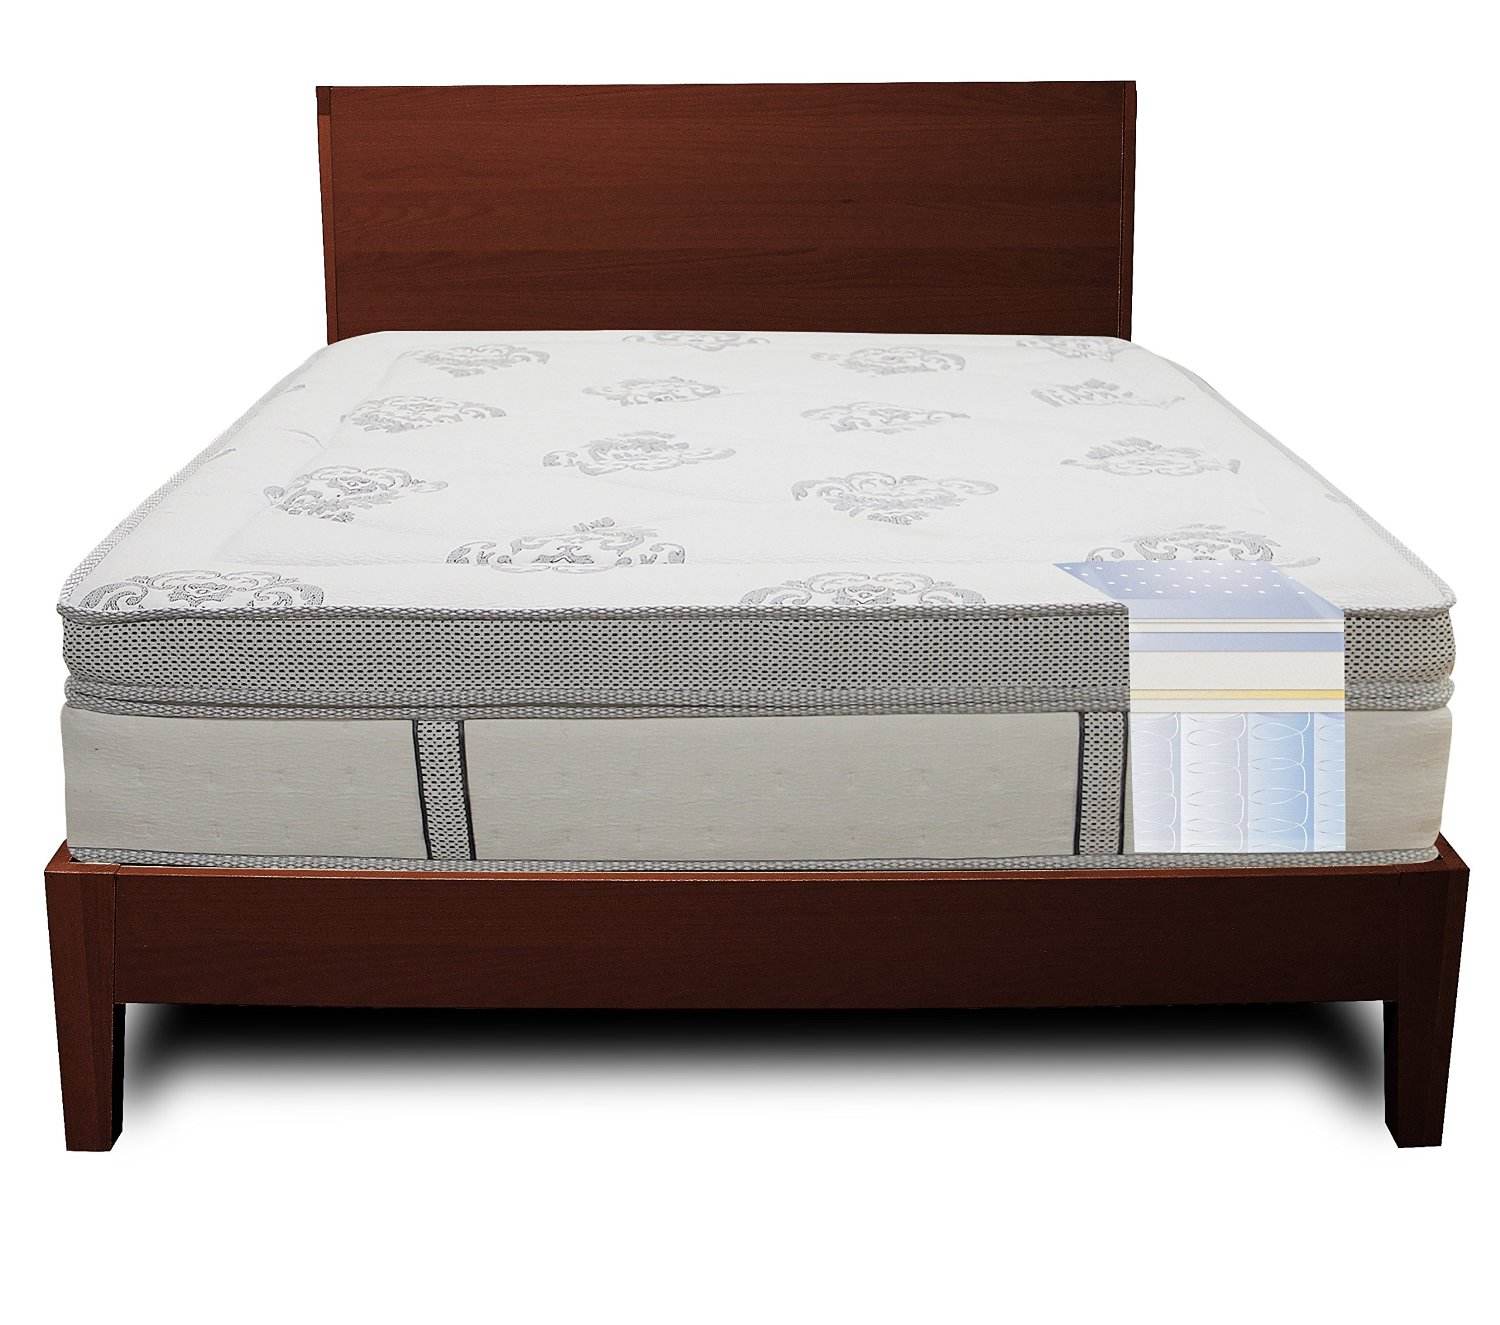 Classic Brands Gramercy 14 Inch Hybrid Cool Gel Memory Foam and Innerspring Mattress review